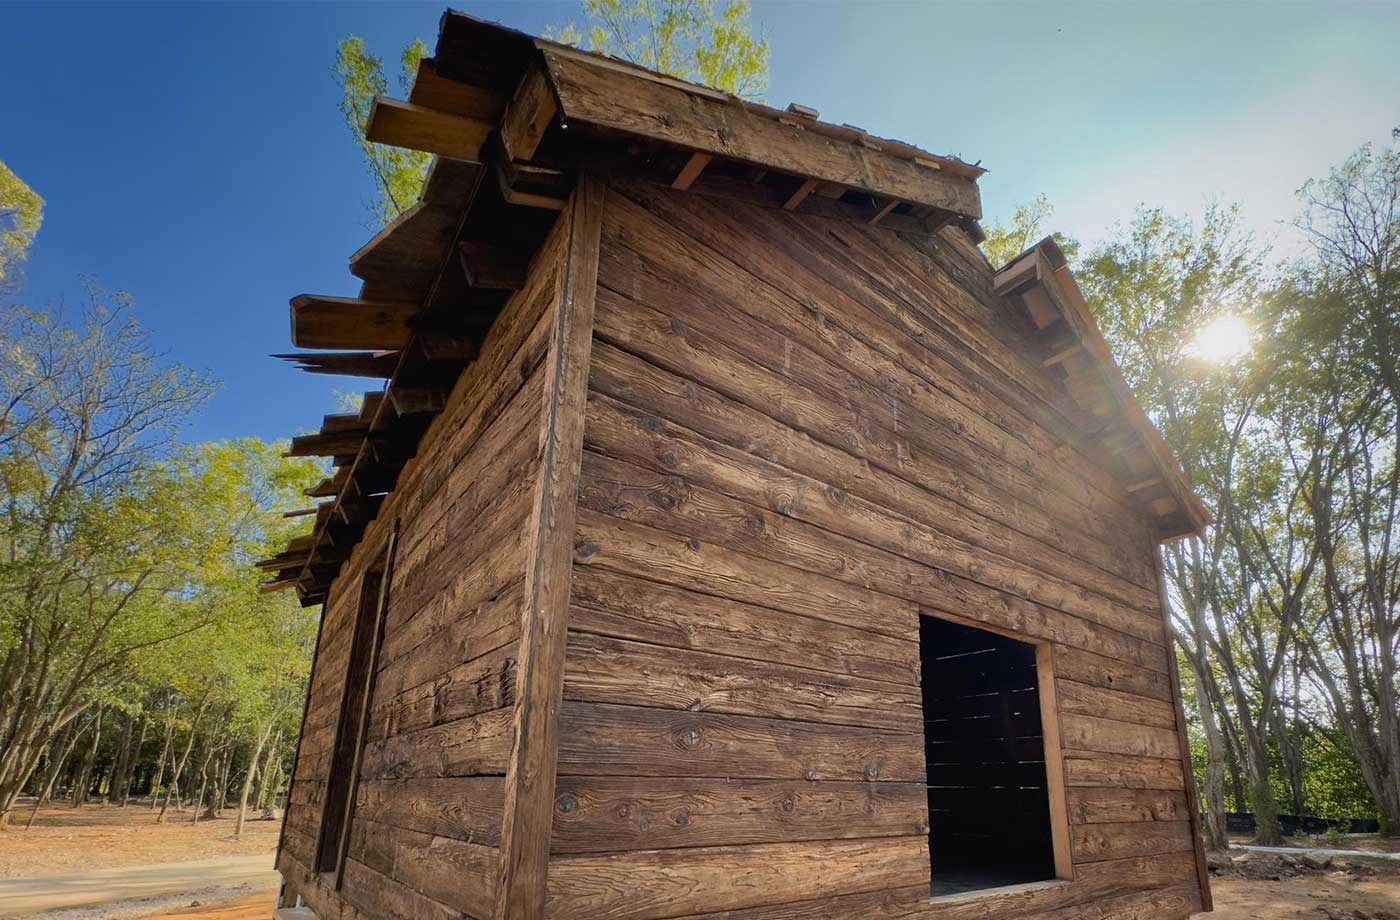 A replica of a dwelling inhabited by enslaved people.